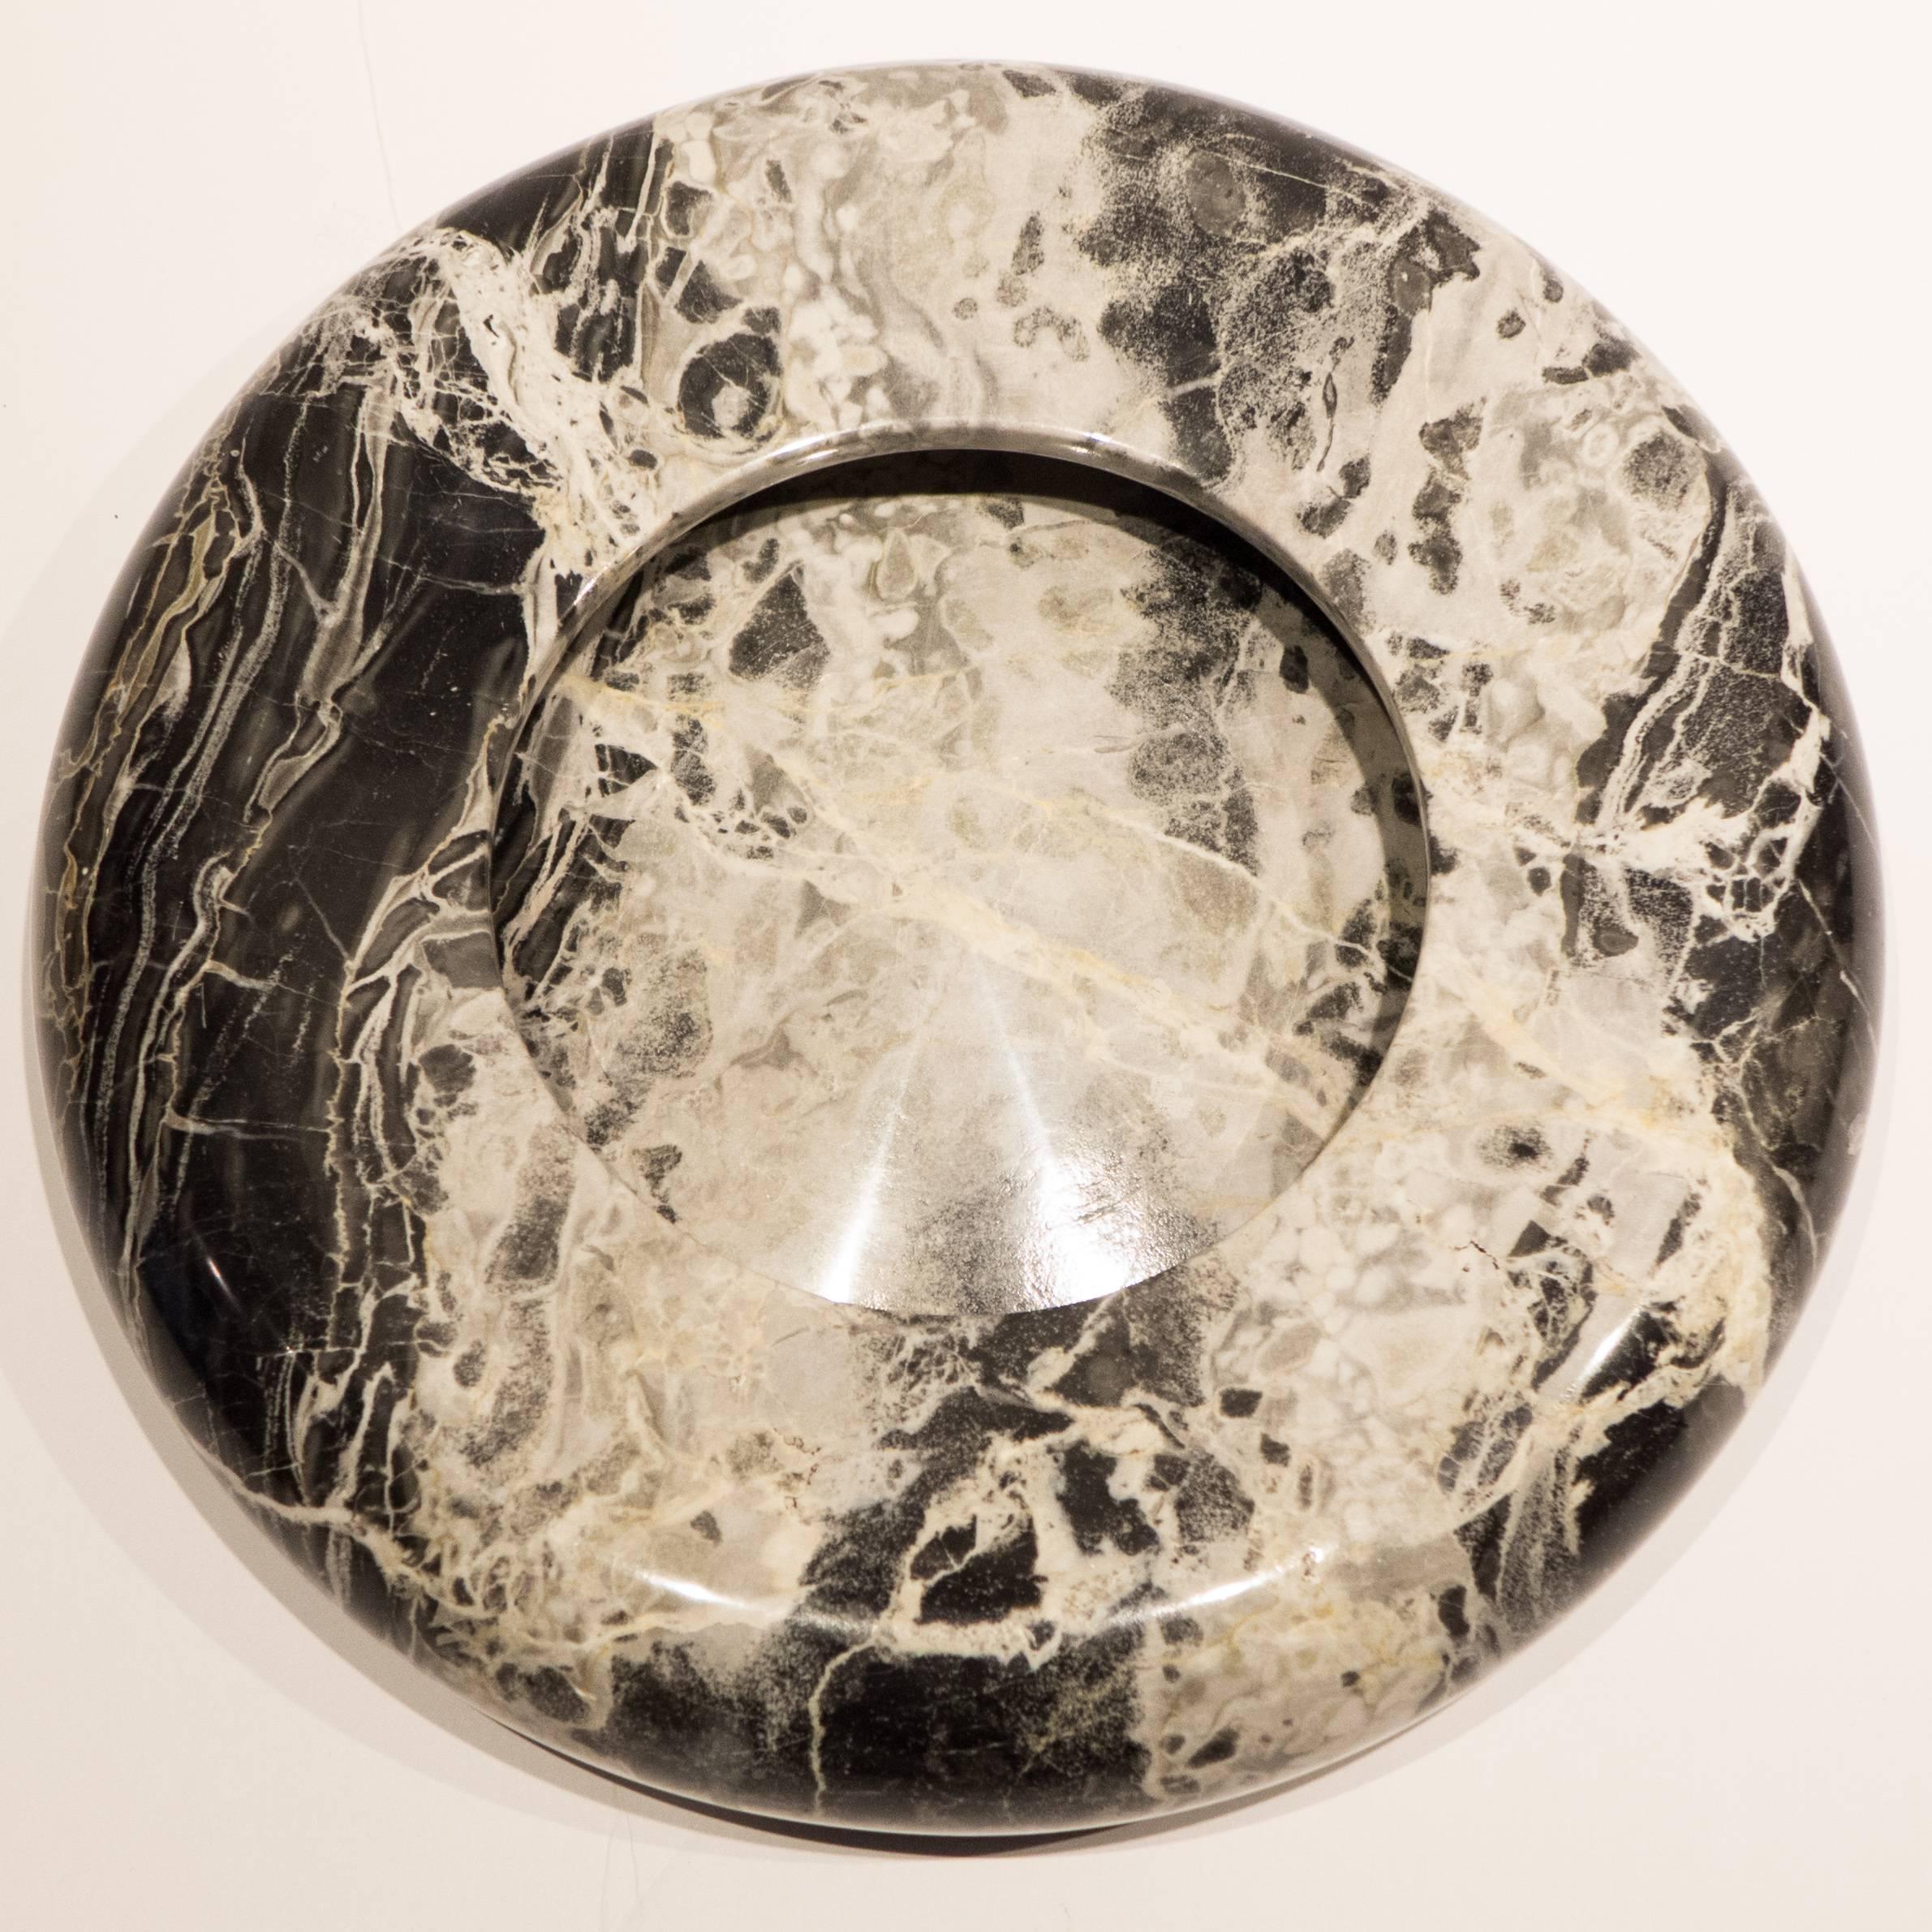 Round marble centrepiece bowl of highly figured, polished Carrara marble. Designed by Sergio Asti and produced by Up & Up, Italy, for Atelier International, circa 1970s. Part of a collection of Up & Up marble vessels from a Long Island, NY,